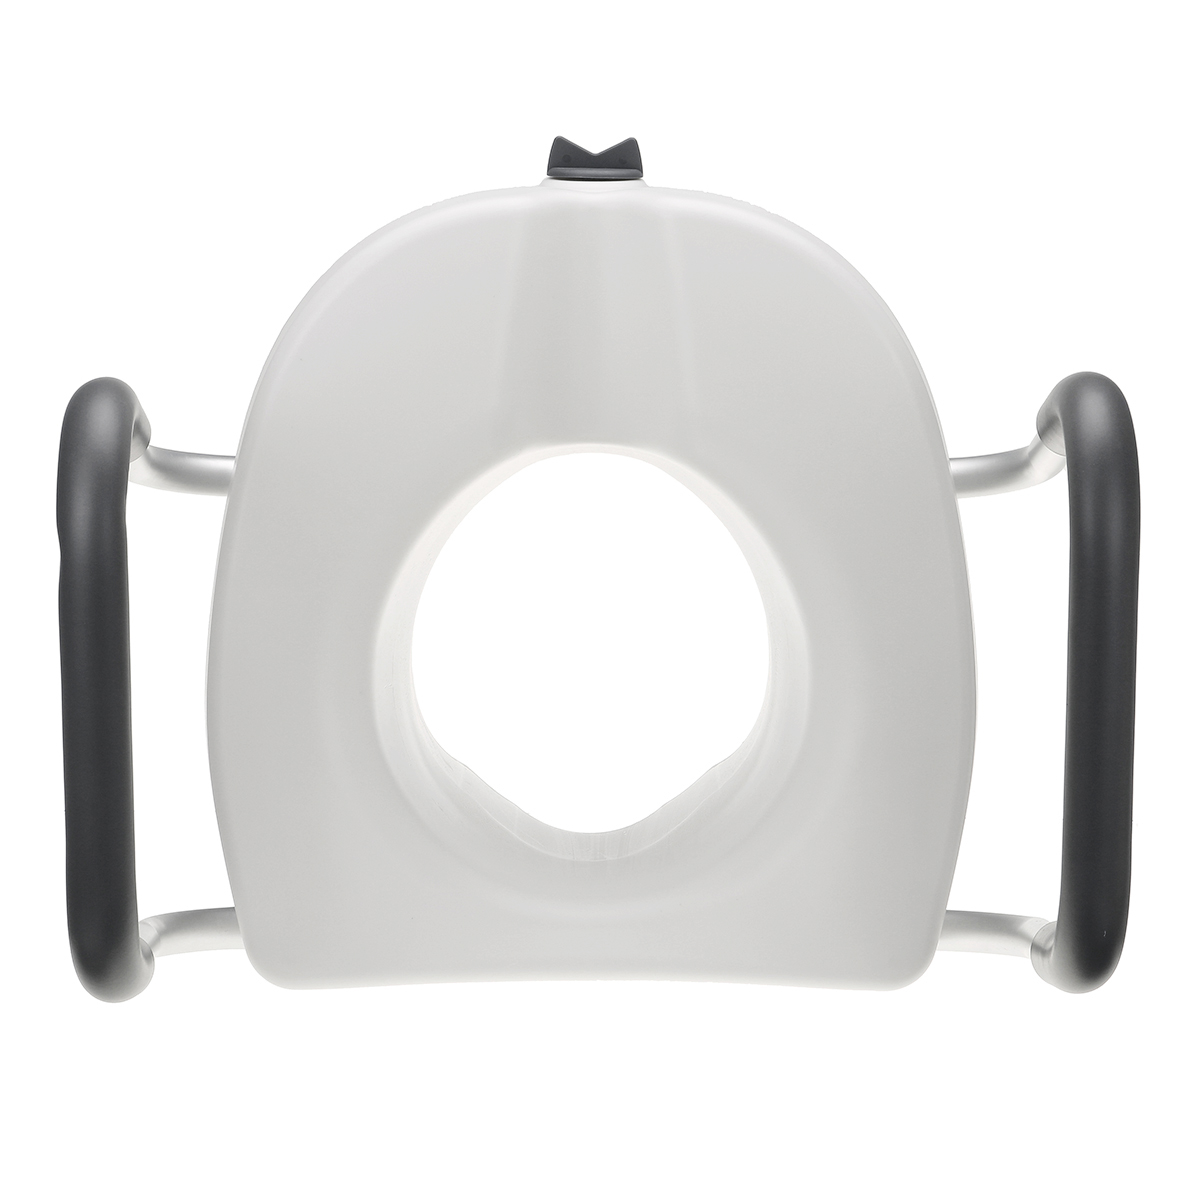 Removable Raised Toilet Seat With Arms Handles Padded Disability Aid Elderly Supports 6